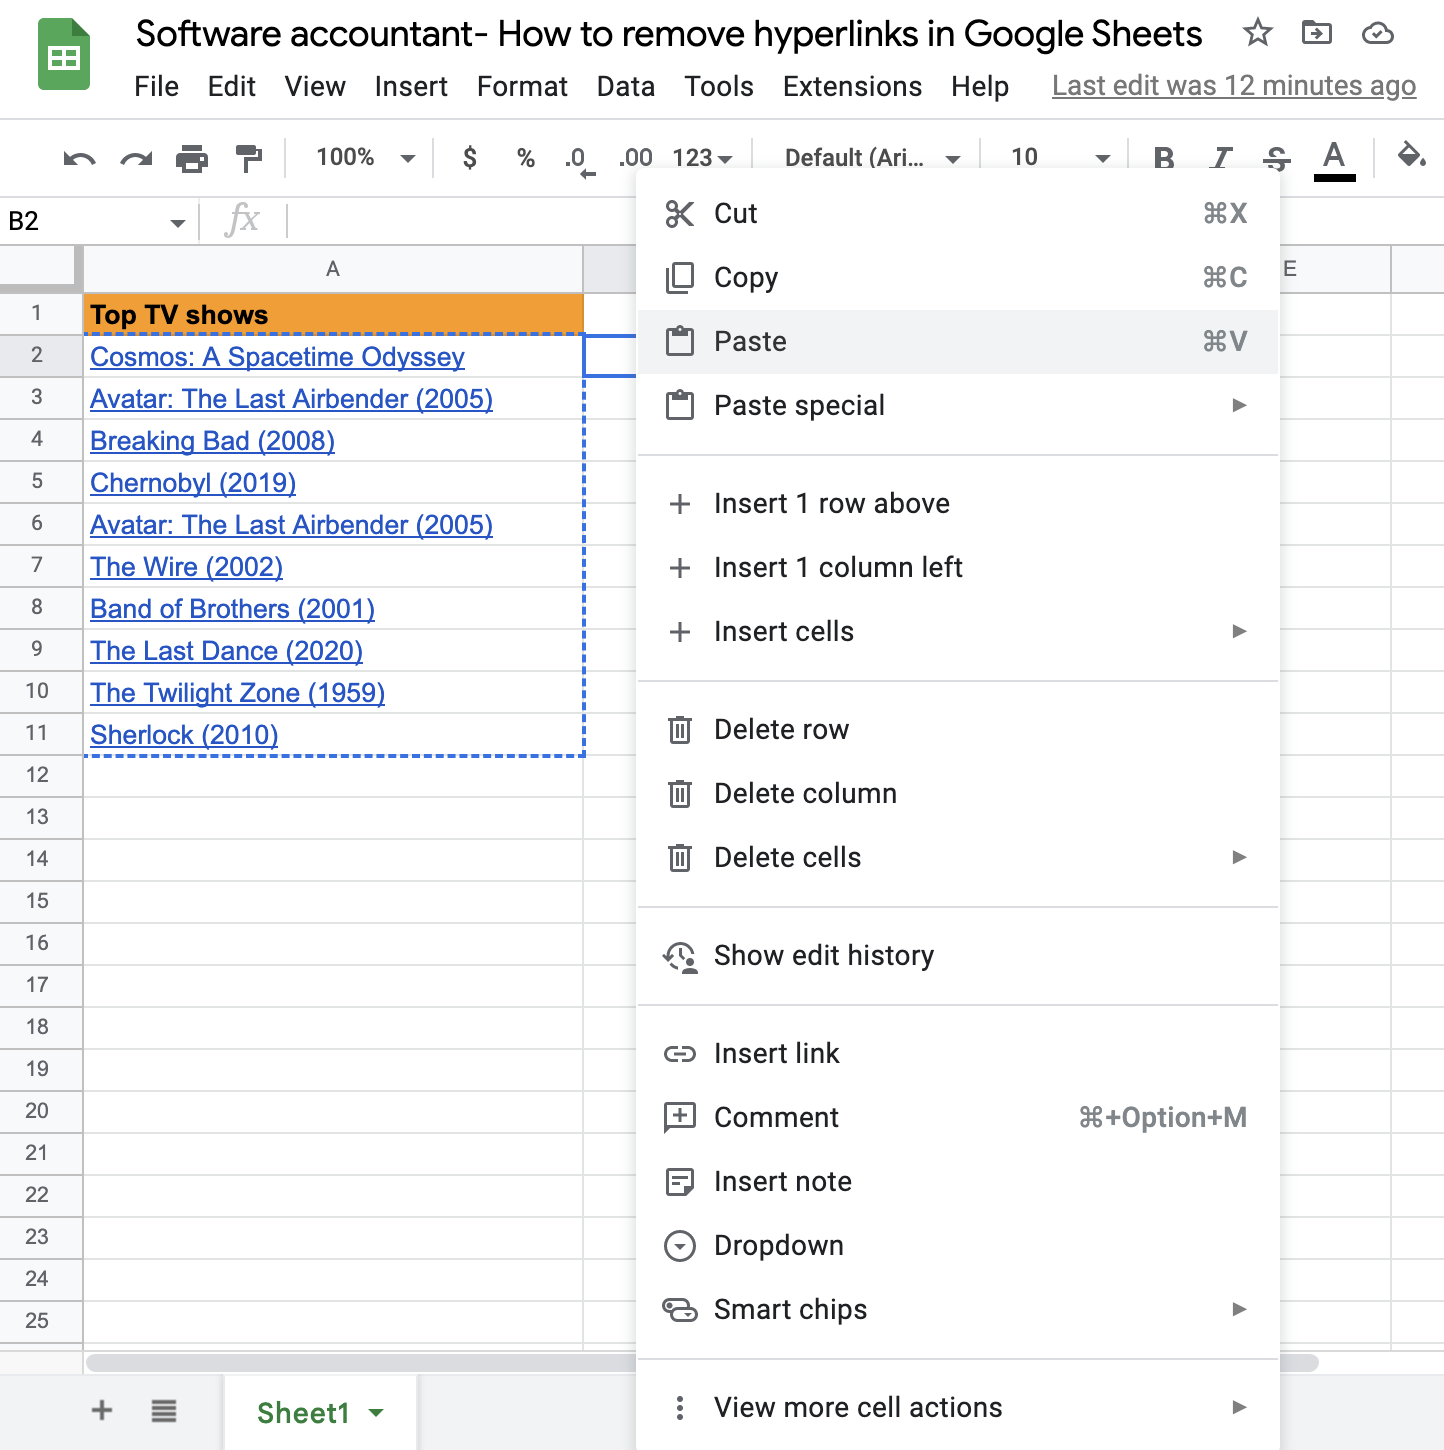 How to remove hyperlinks in Google Sheets using paste special